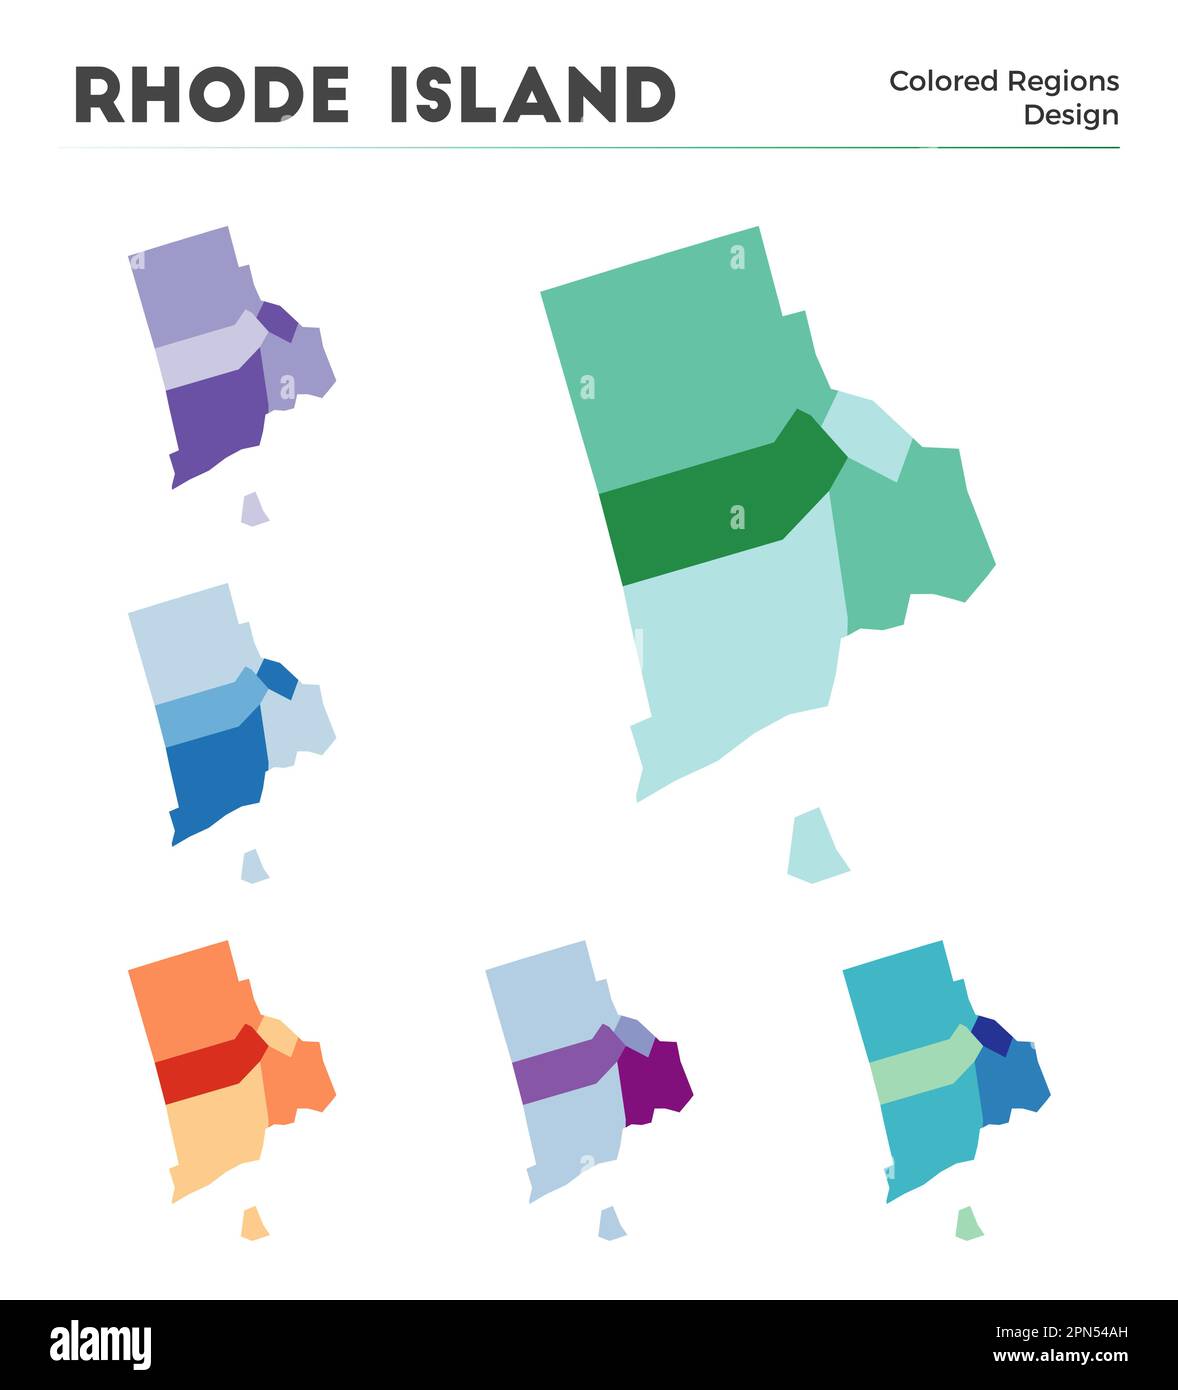 Rhode Island map collection. Borders of Rhode Island for your infographic. Colored us state regions. Vector illustration. Stock Vector